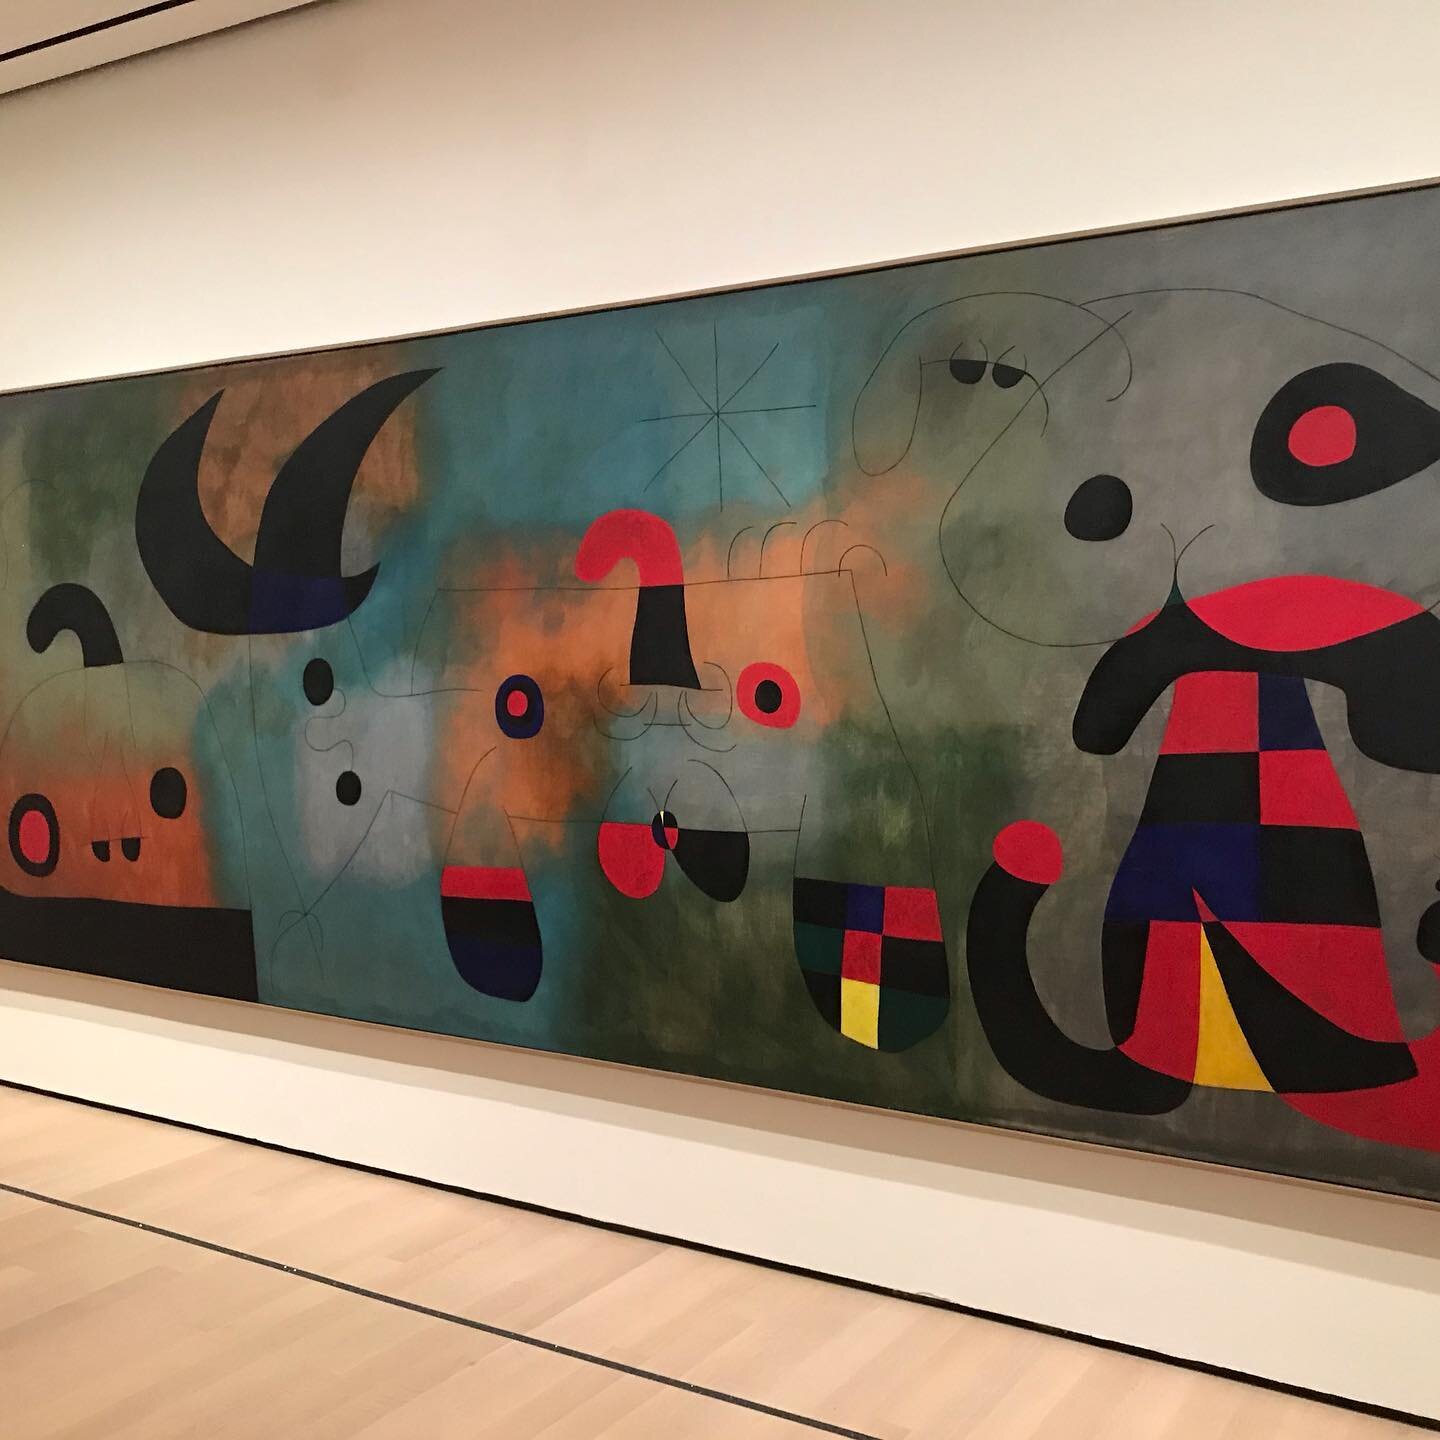 Joan Mir&oacute;&rsquo;s World

A Joan Mir&oacute; exhibit currently underway at the  of Modern Art (MOMA) in NYC is a strong confirmation of why the Spanish painter occupies a storied space in modern art. A close read of Miro's works on display make